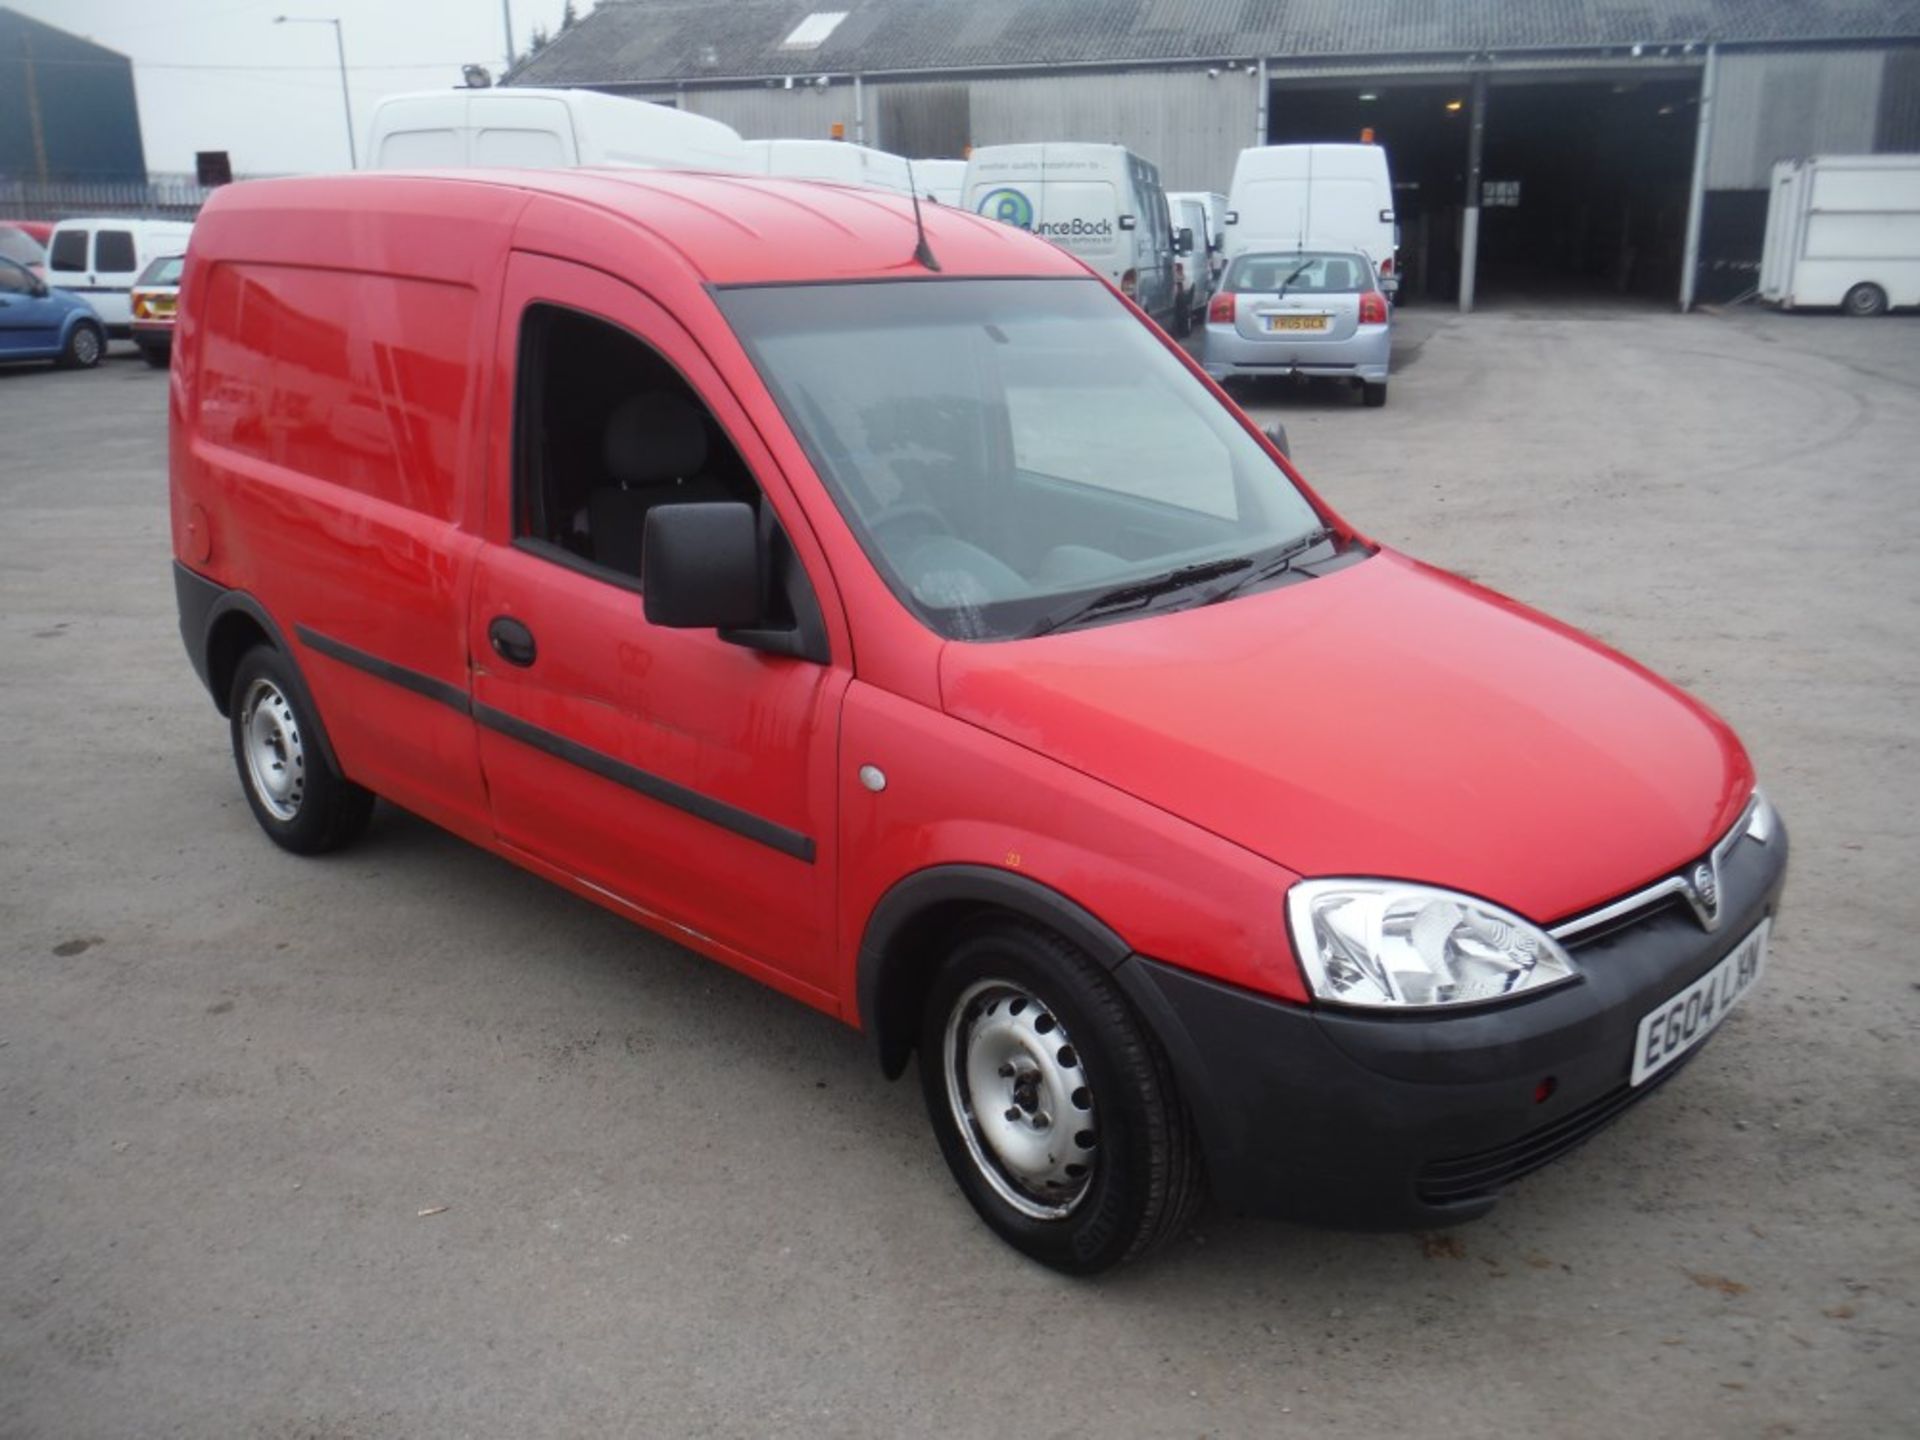 04 reg VAUXHALL COMBO 1700 DI VAN, 1ST REG 07/04, 76445M WARRANTED, V5 HERE, 1 OWNER FROM NEW [+